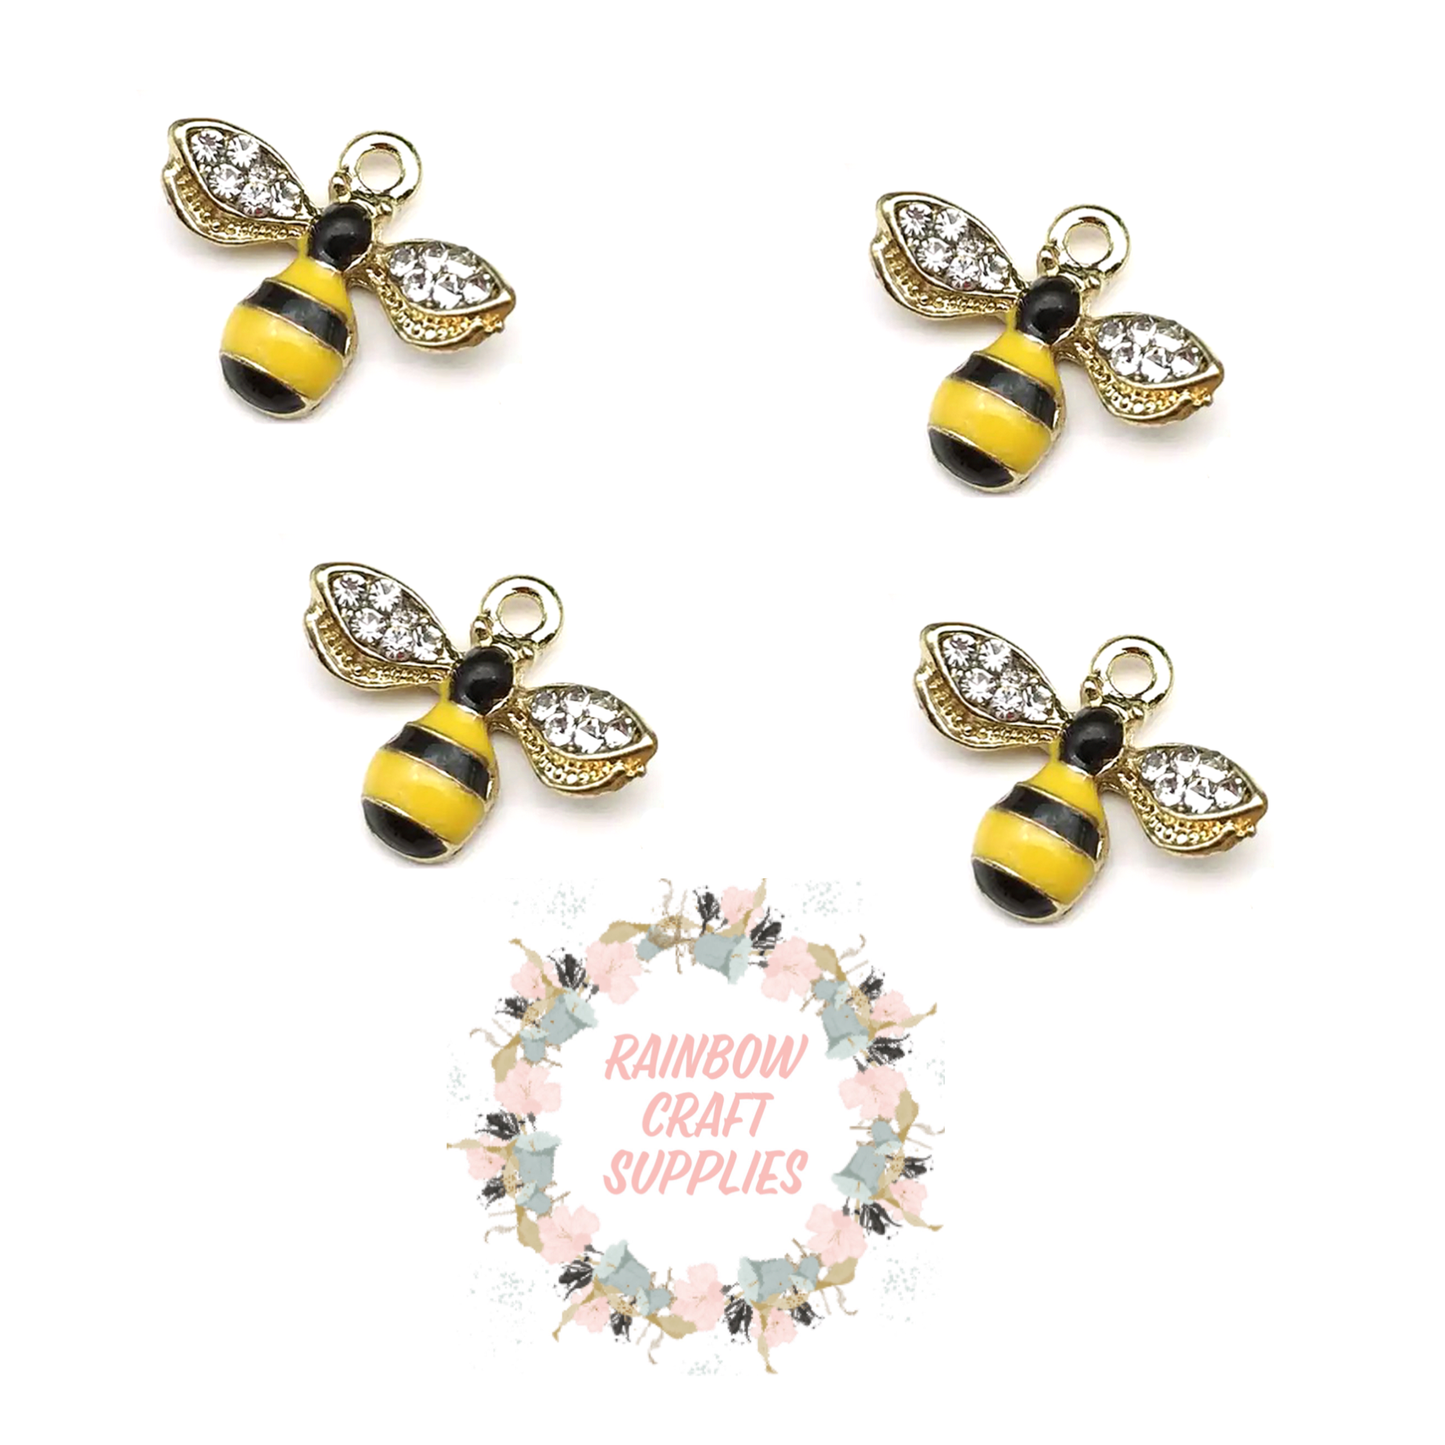 Cute bumble bee enamel and crystal charms